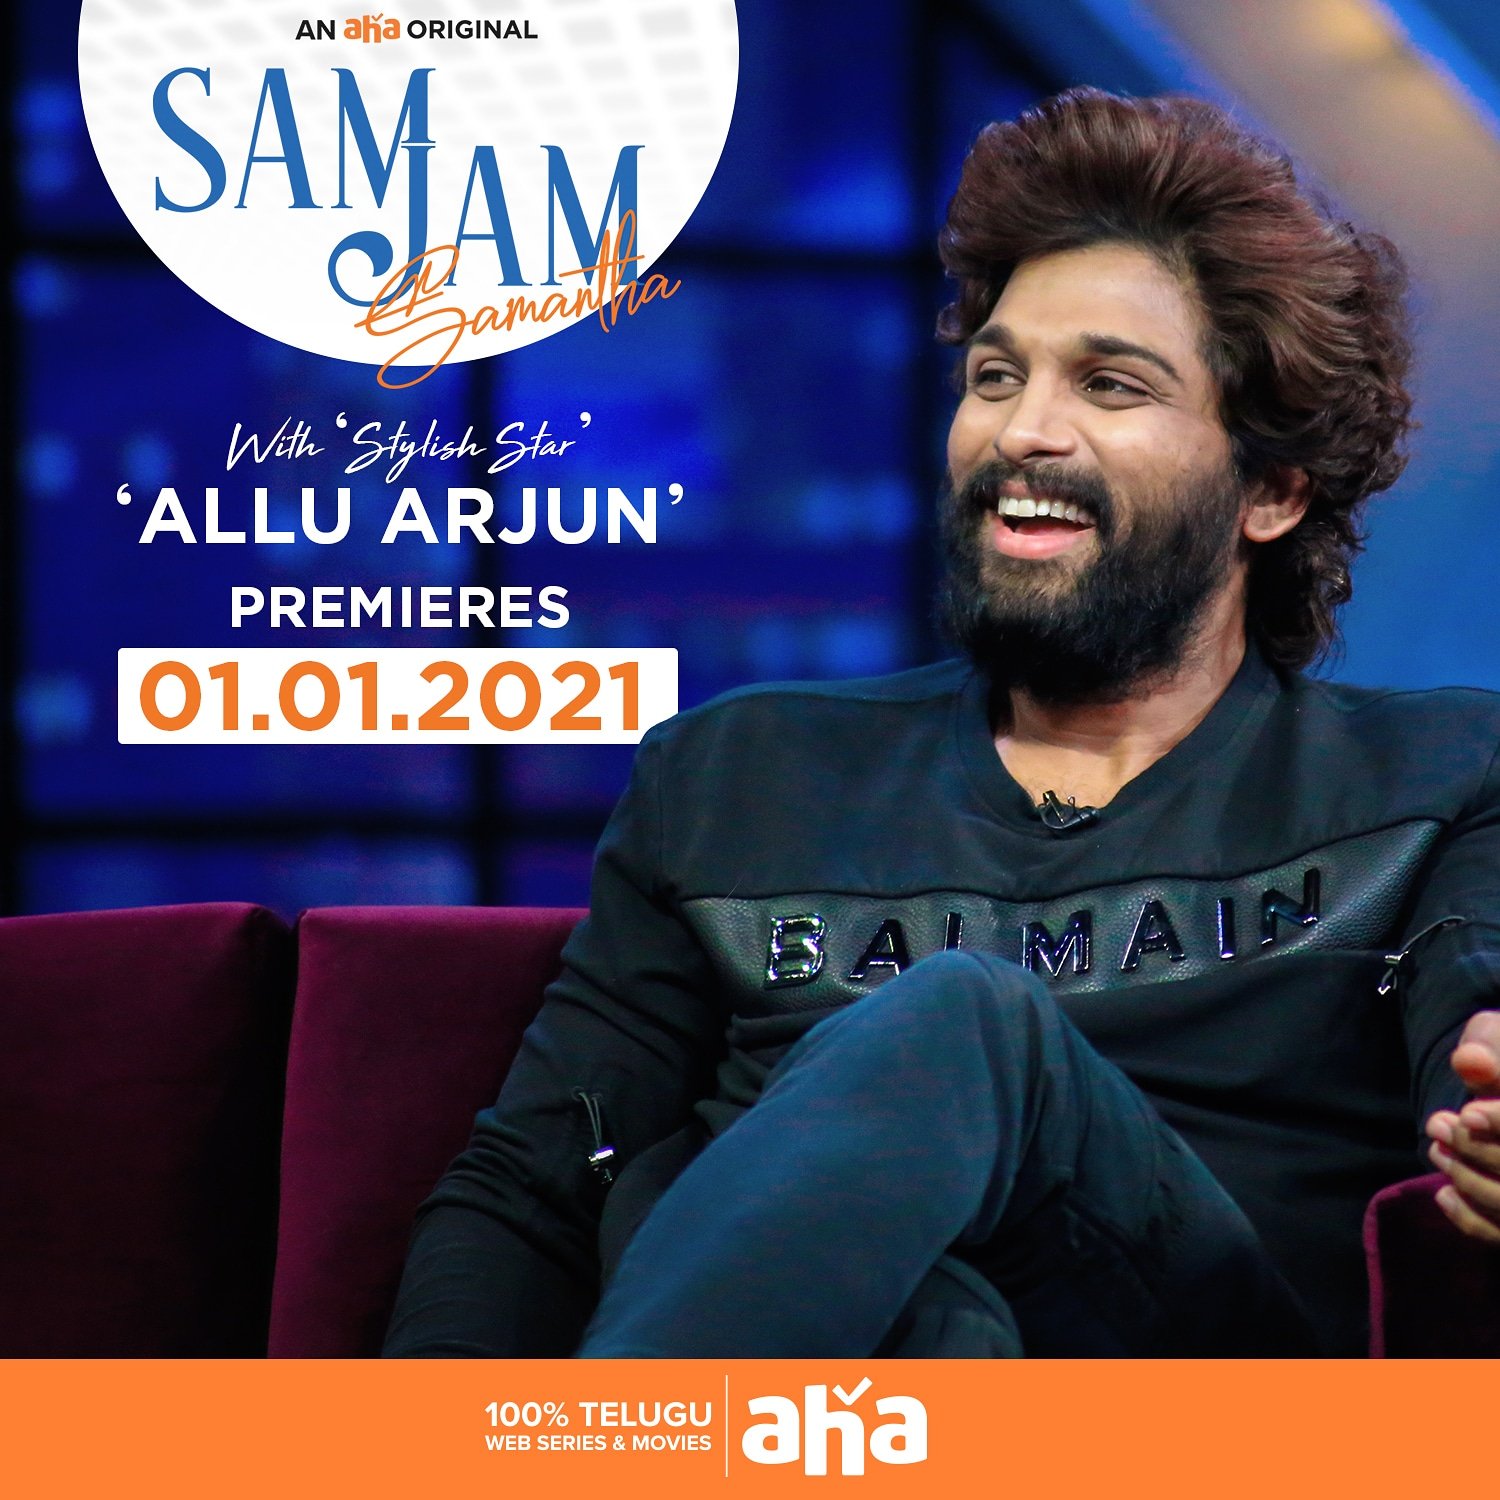 Sam Jam to have Allu Arjun as special guest on Jan 1, 2021